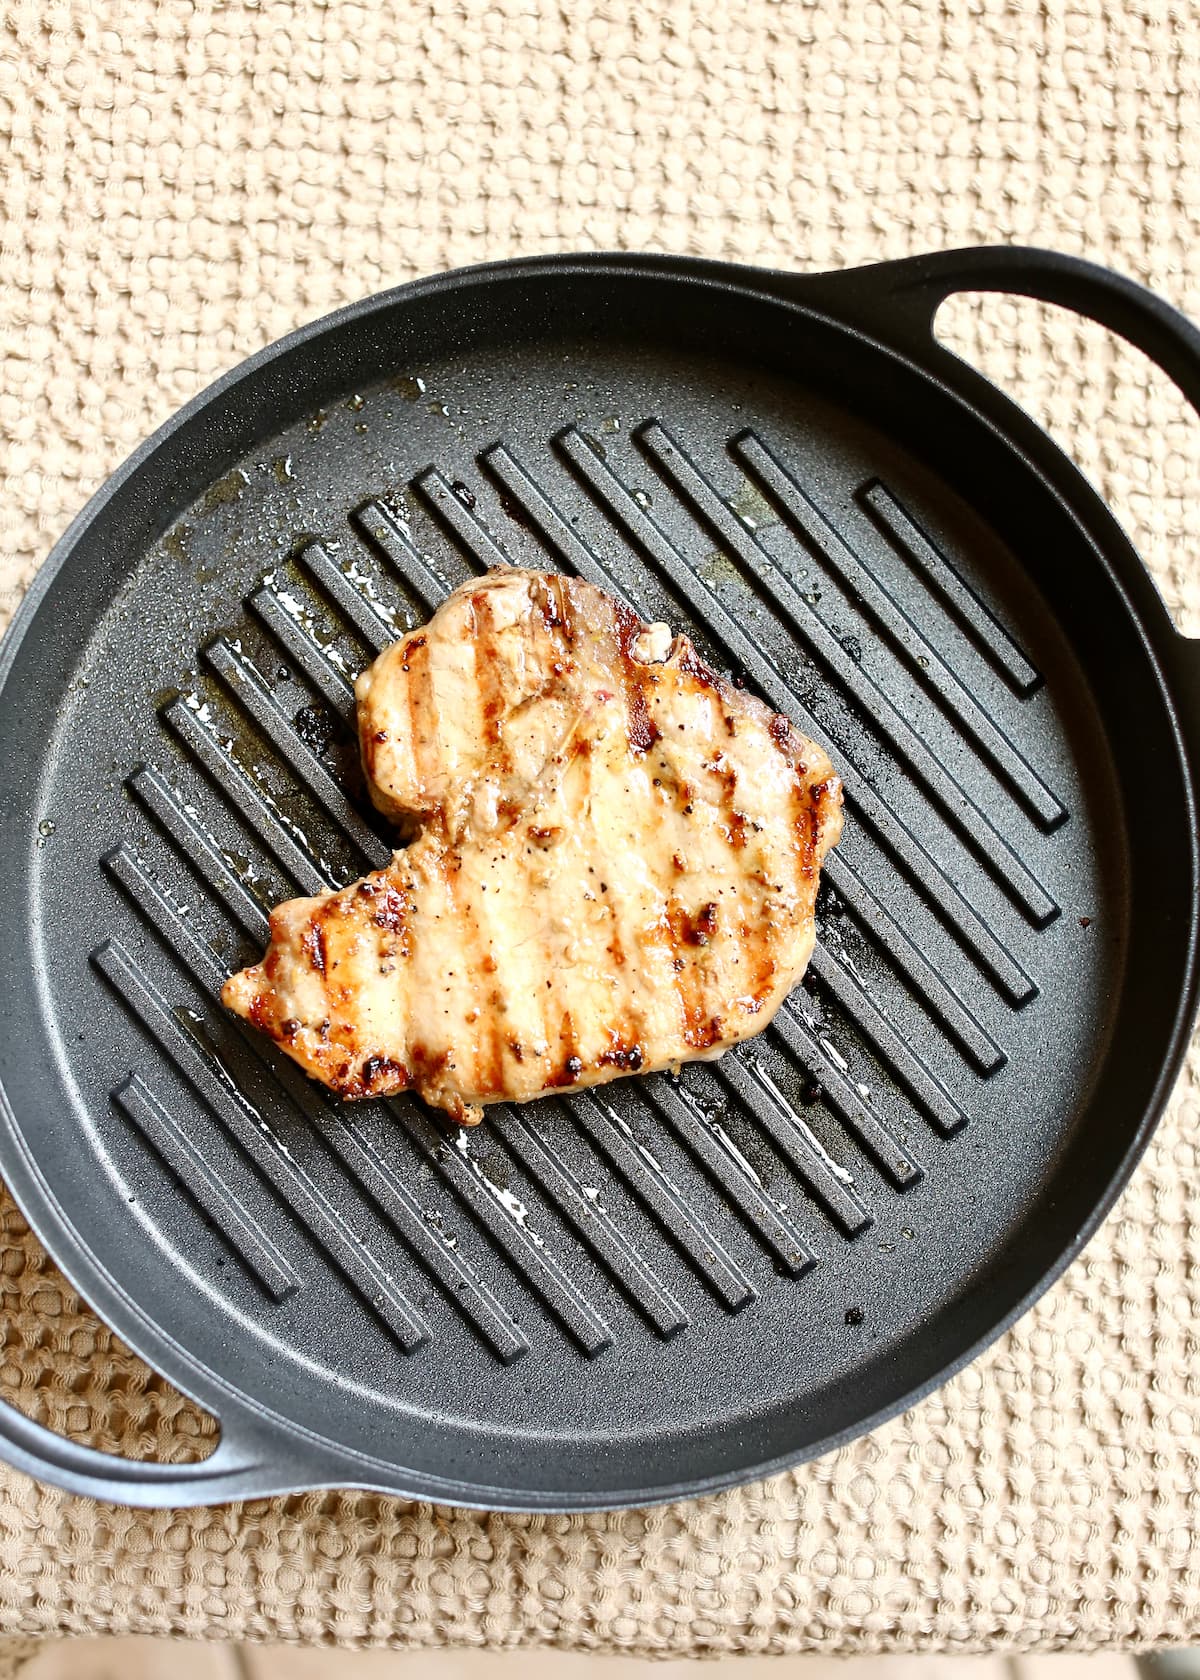 a cooked pork chop in a grill pan.